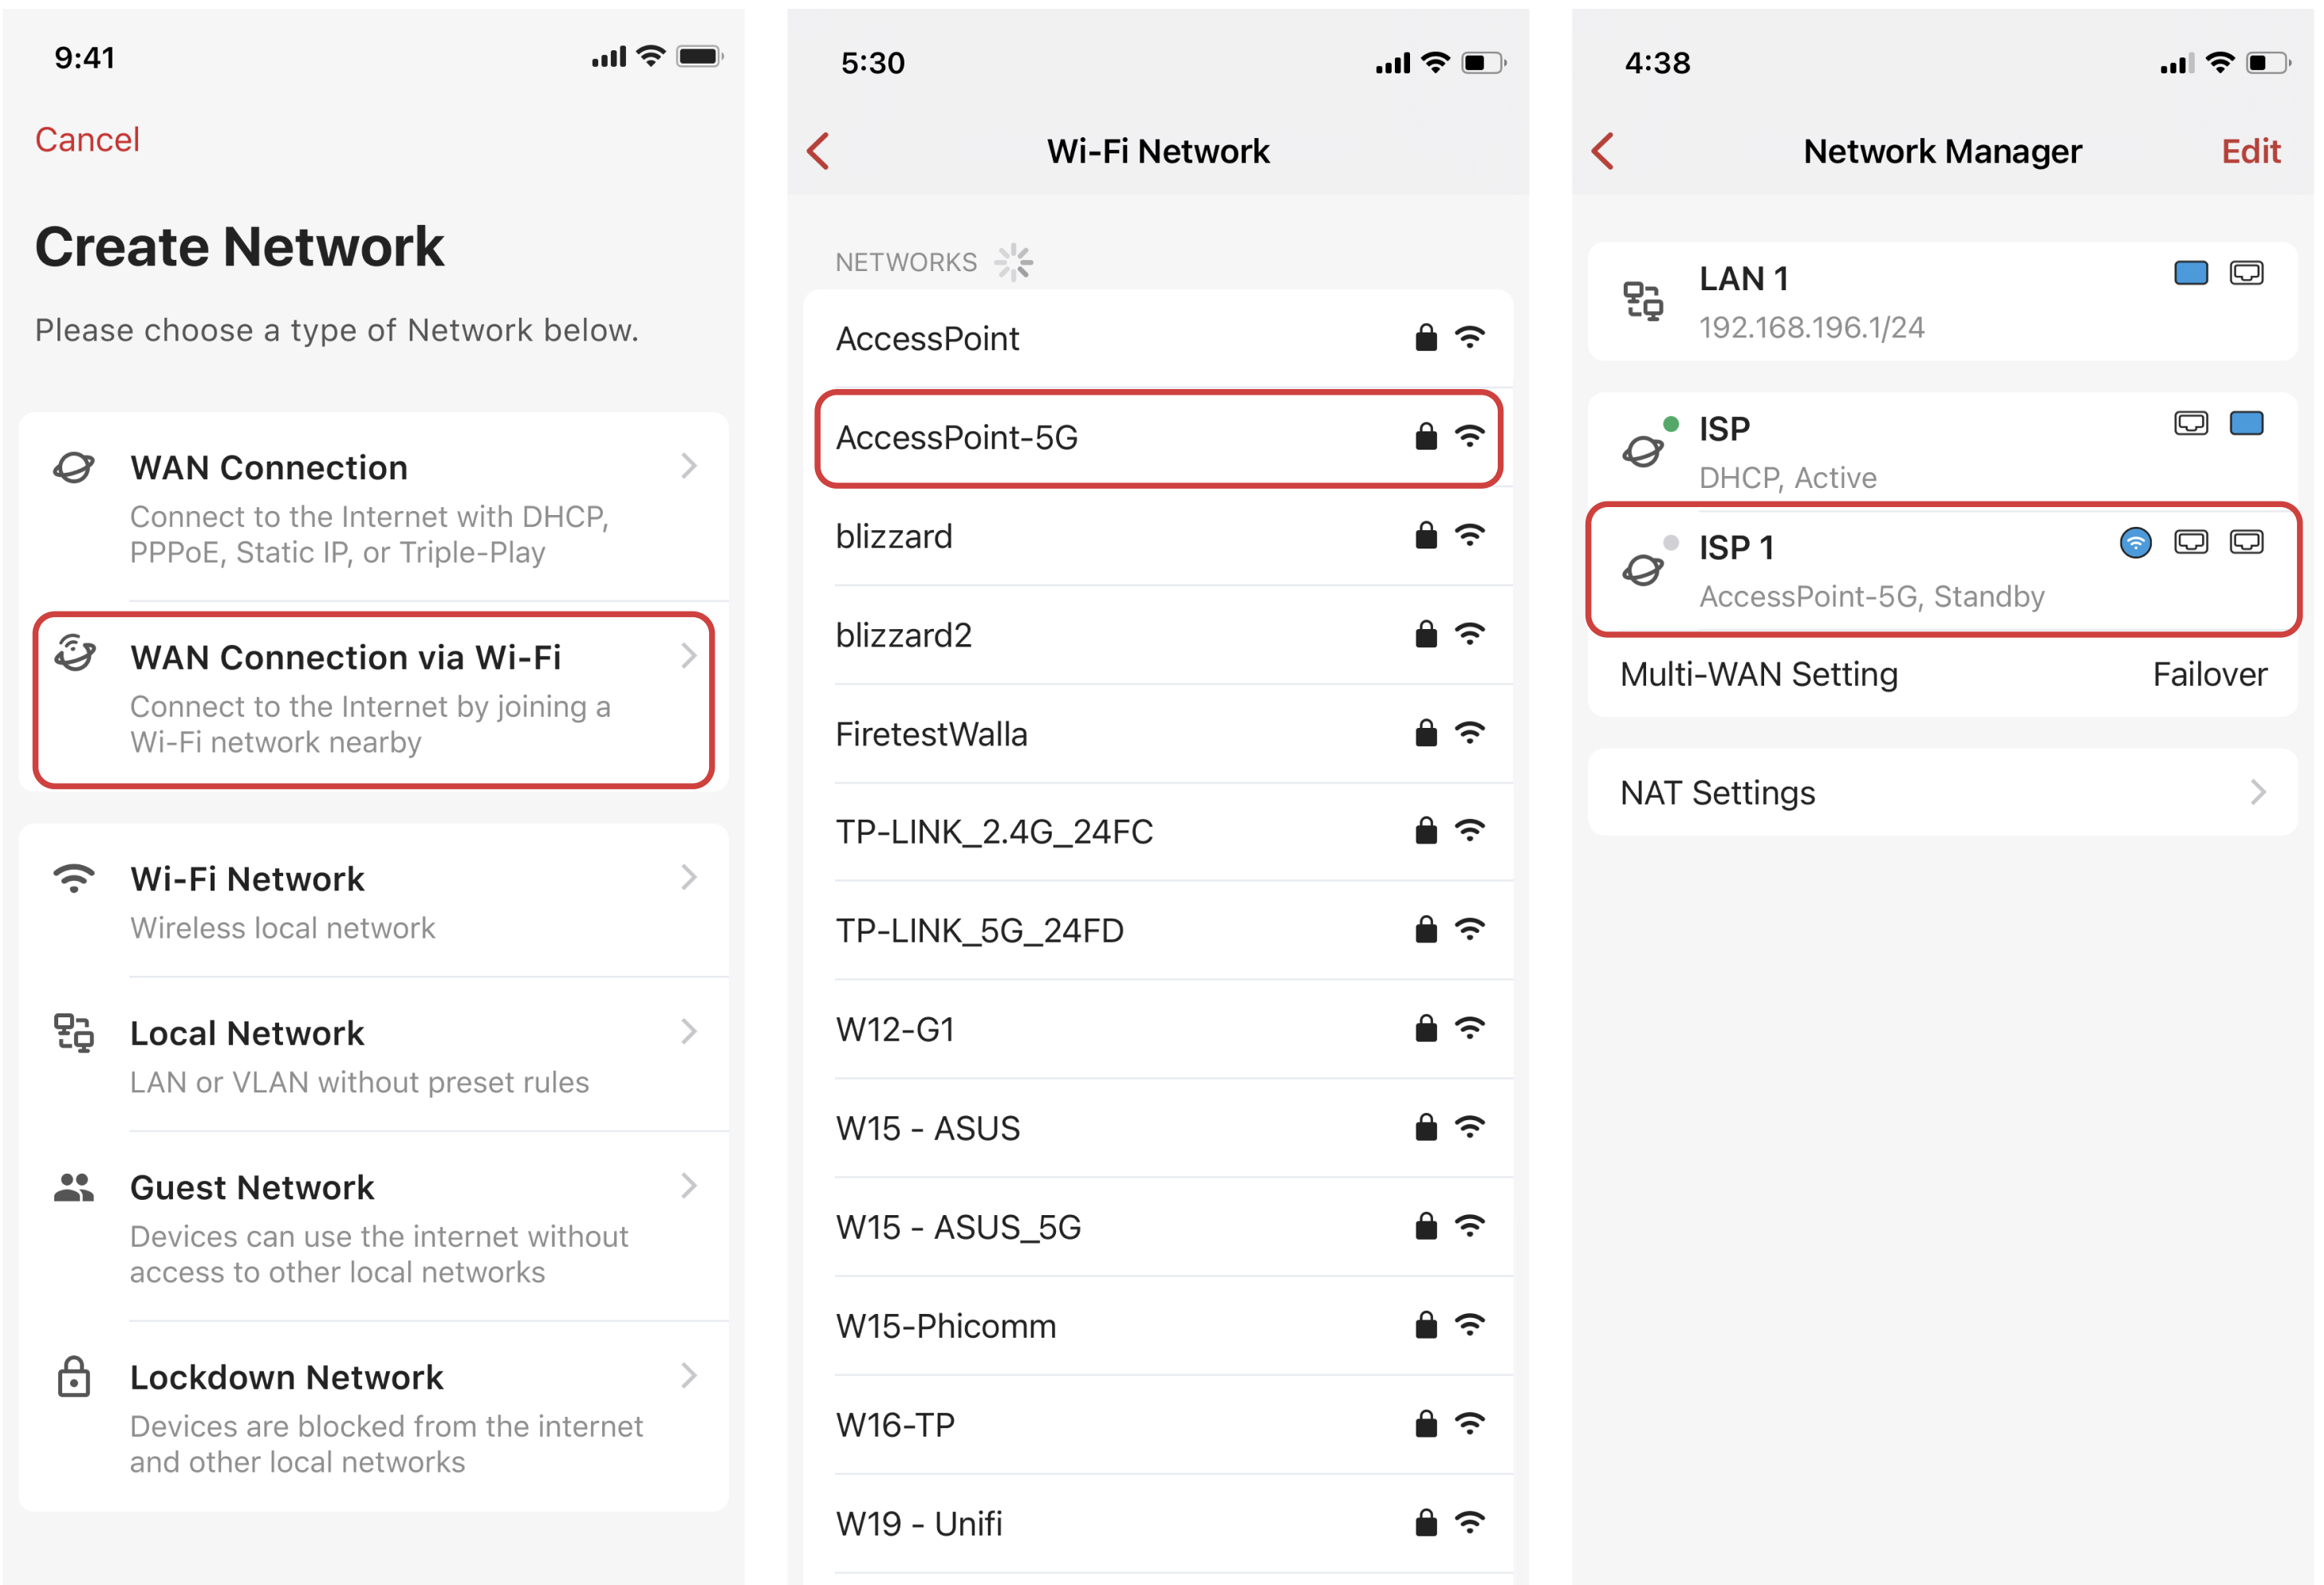 Edit the WiFi used for your configured WAN by choosing another from the list and saving the WiFi